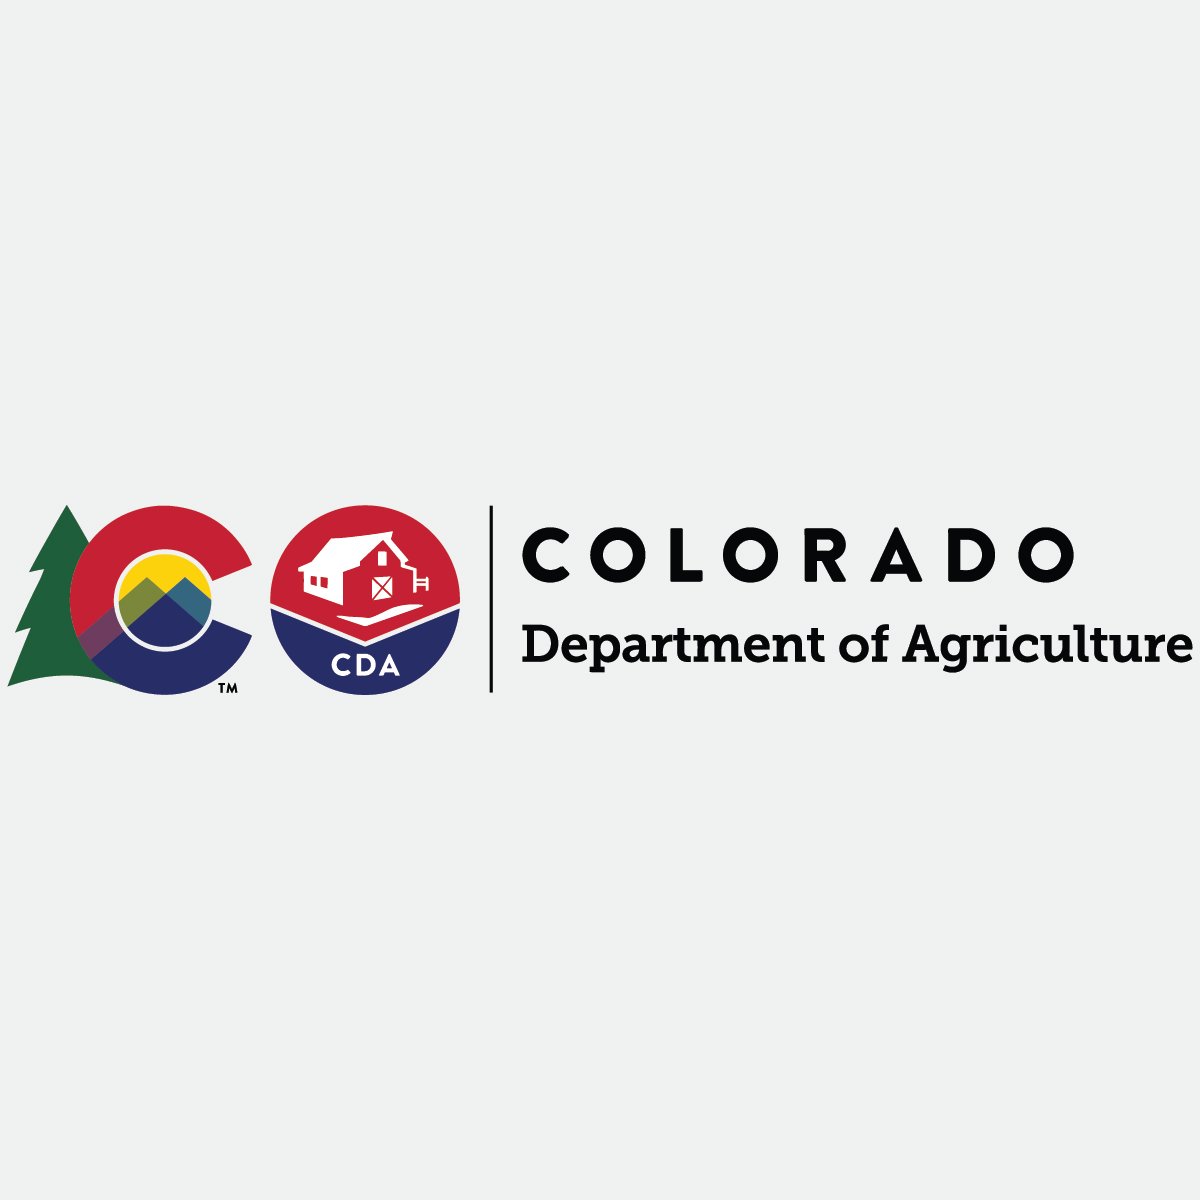 Colorado department of agriculture